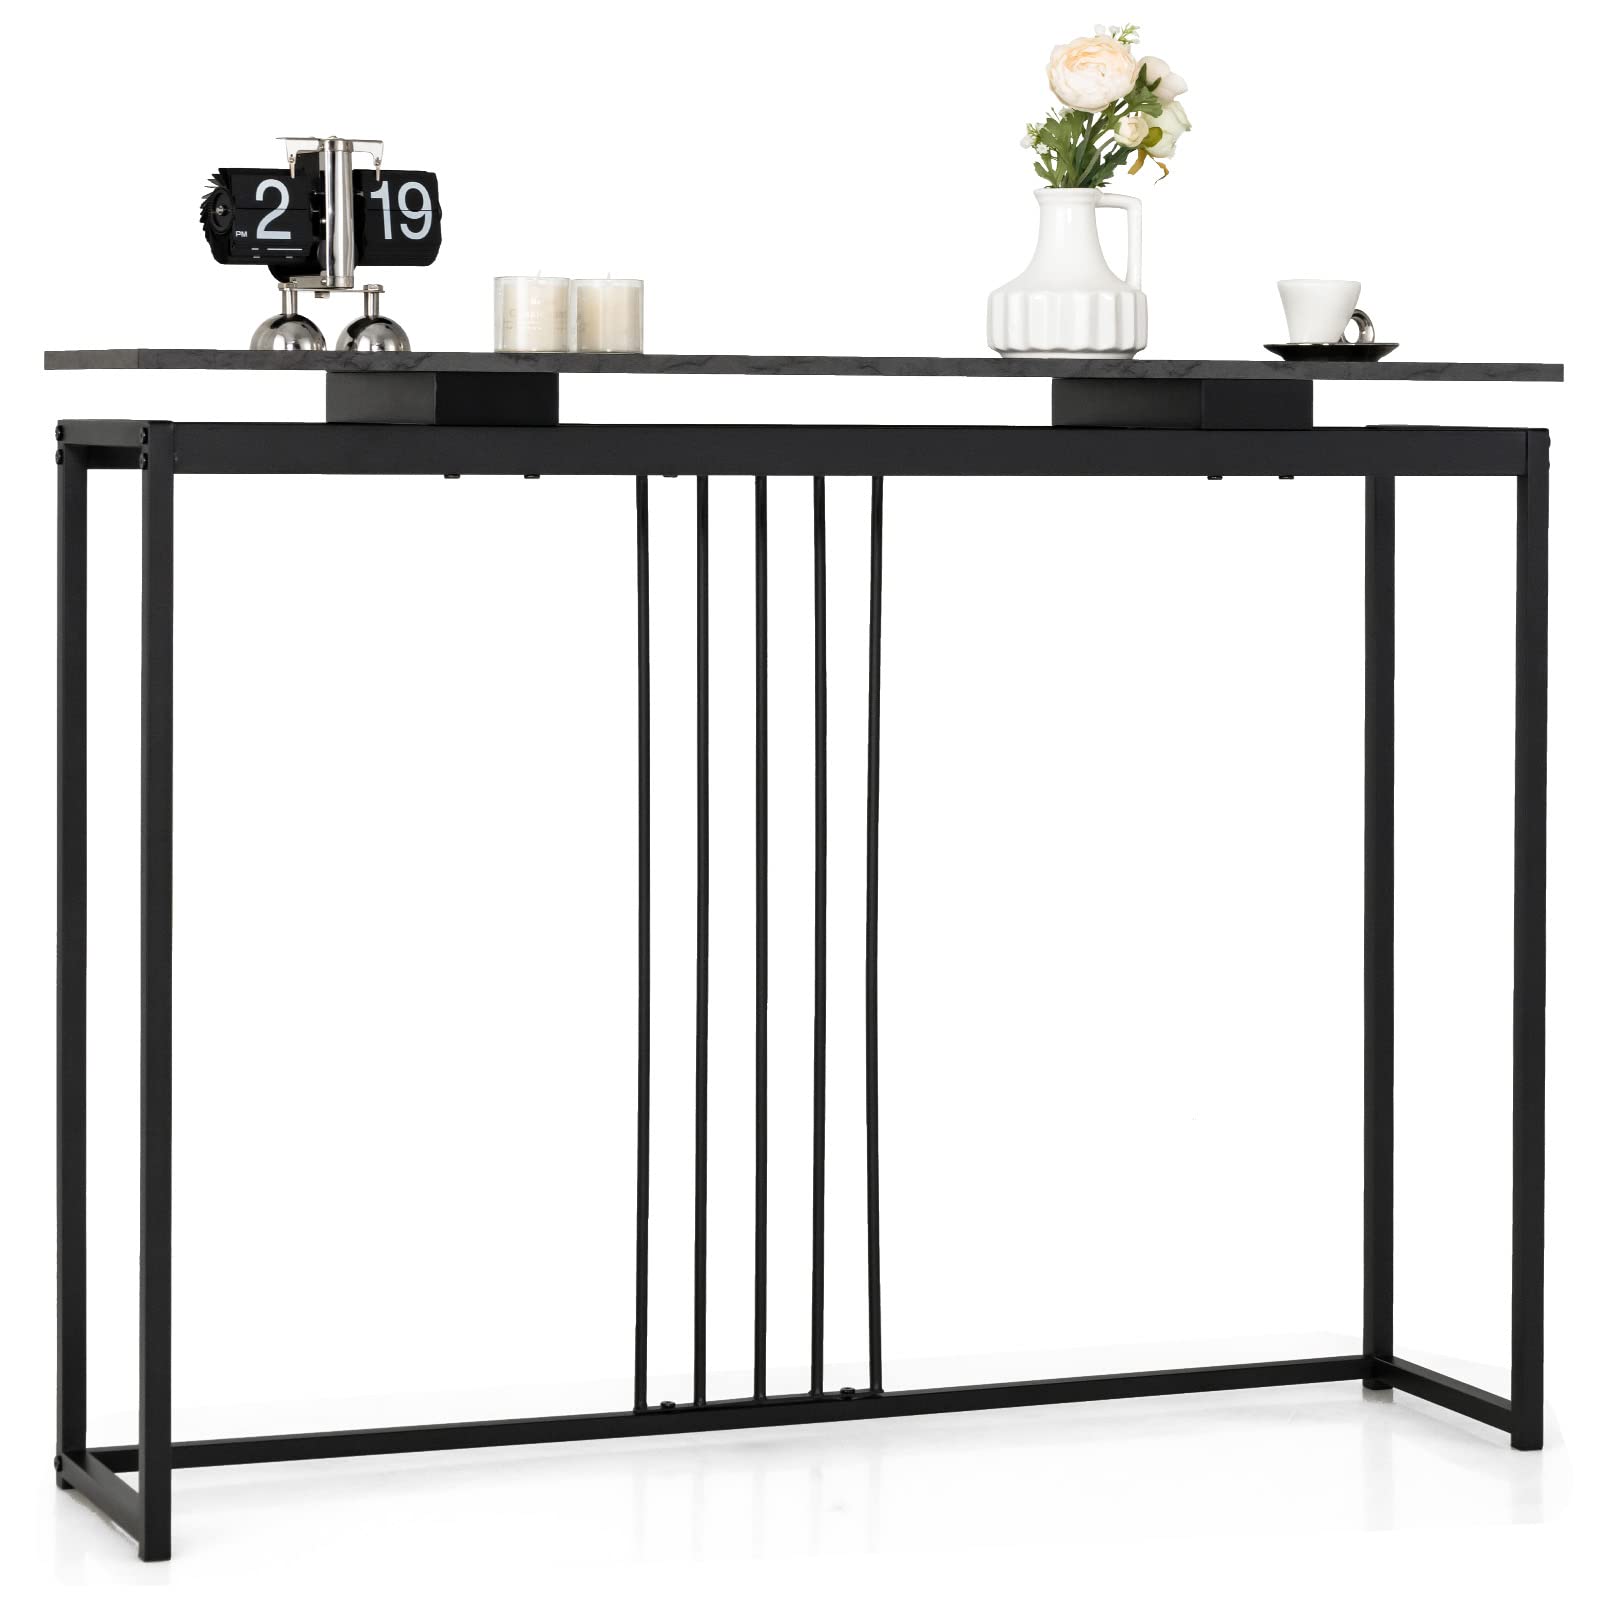 Giantex Console Tables for Entryway - 48" Faux Marble Sofa Table with Powder-Coated Steel Frame, Black